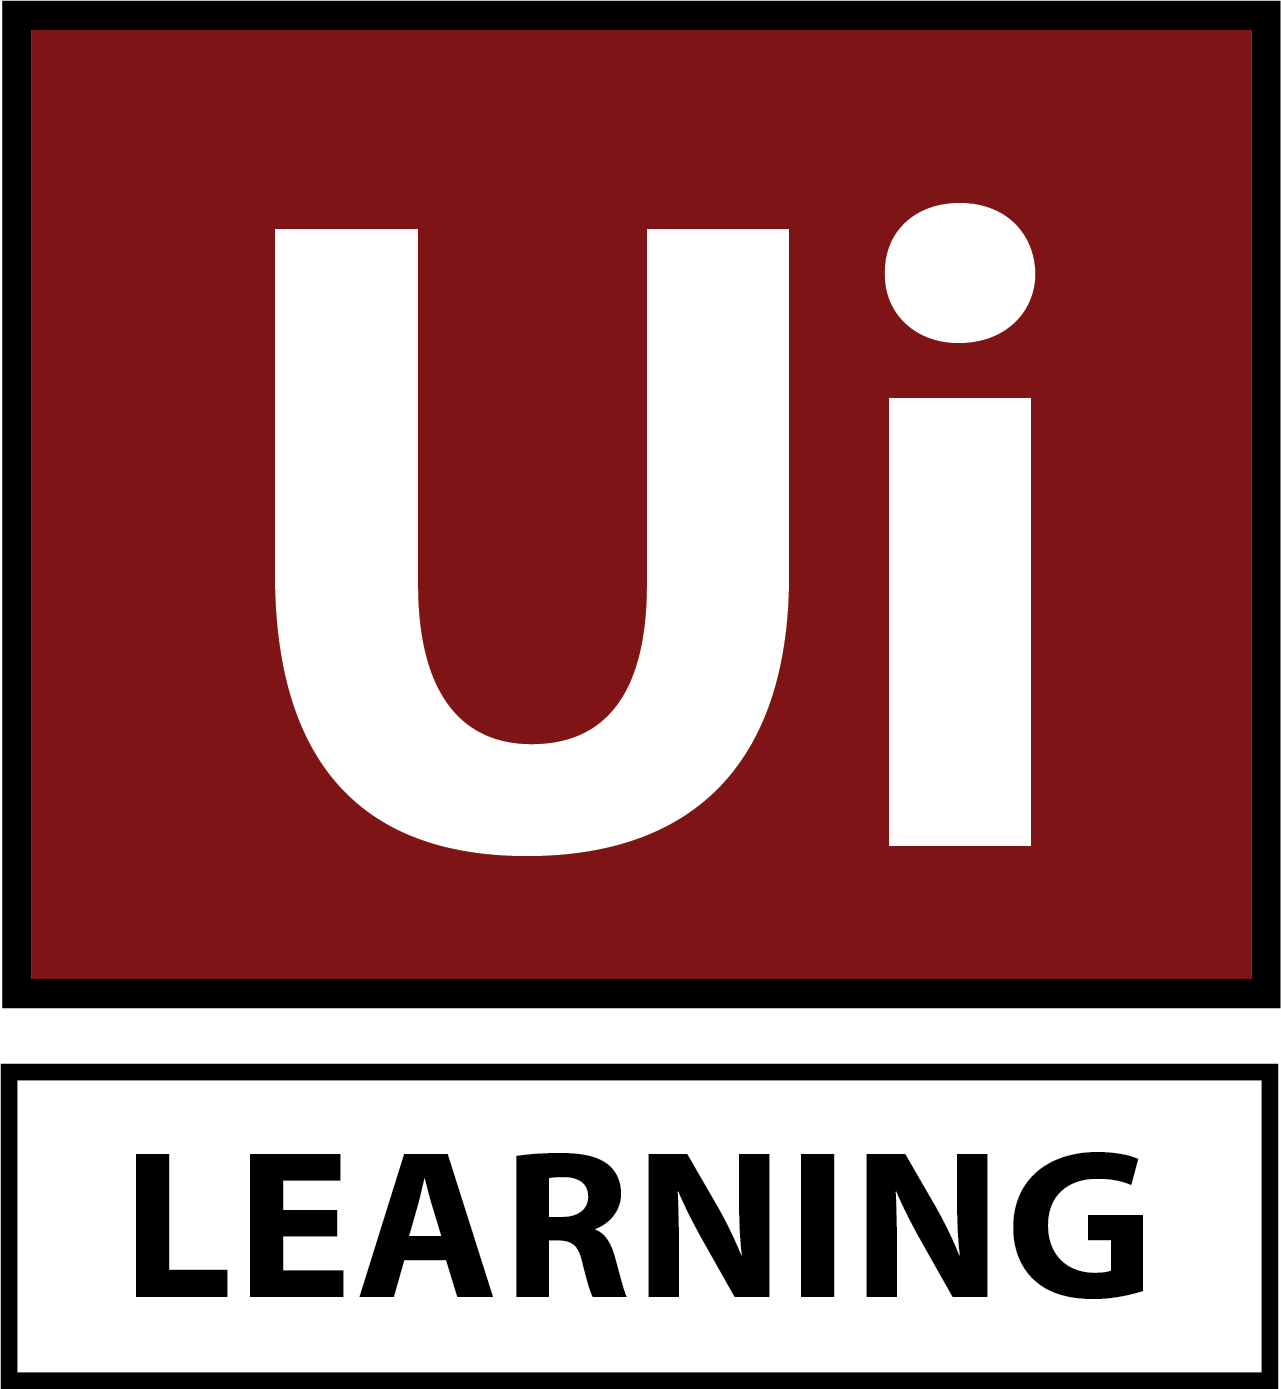 UI Learning Computer Institute